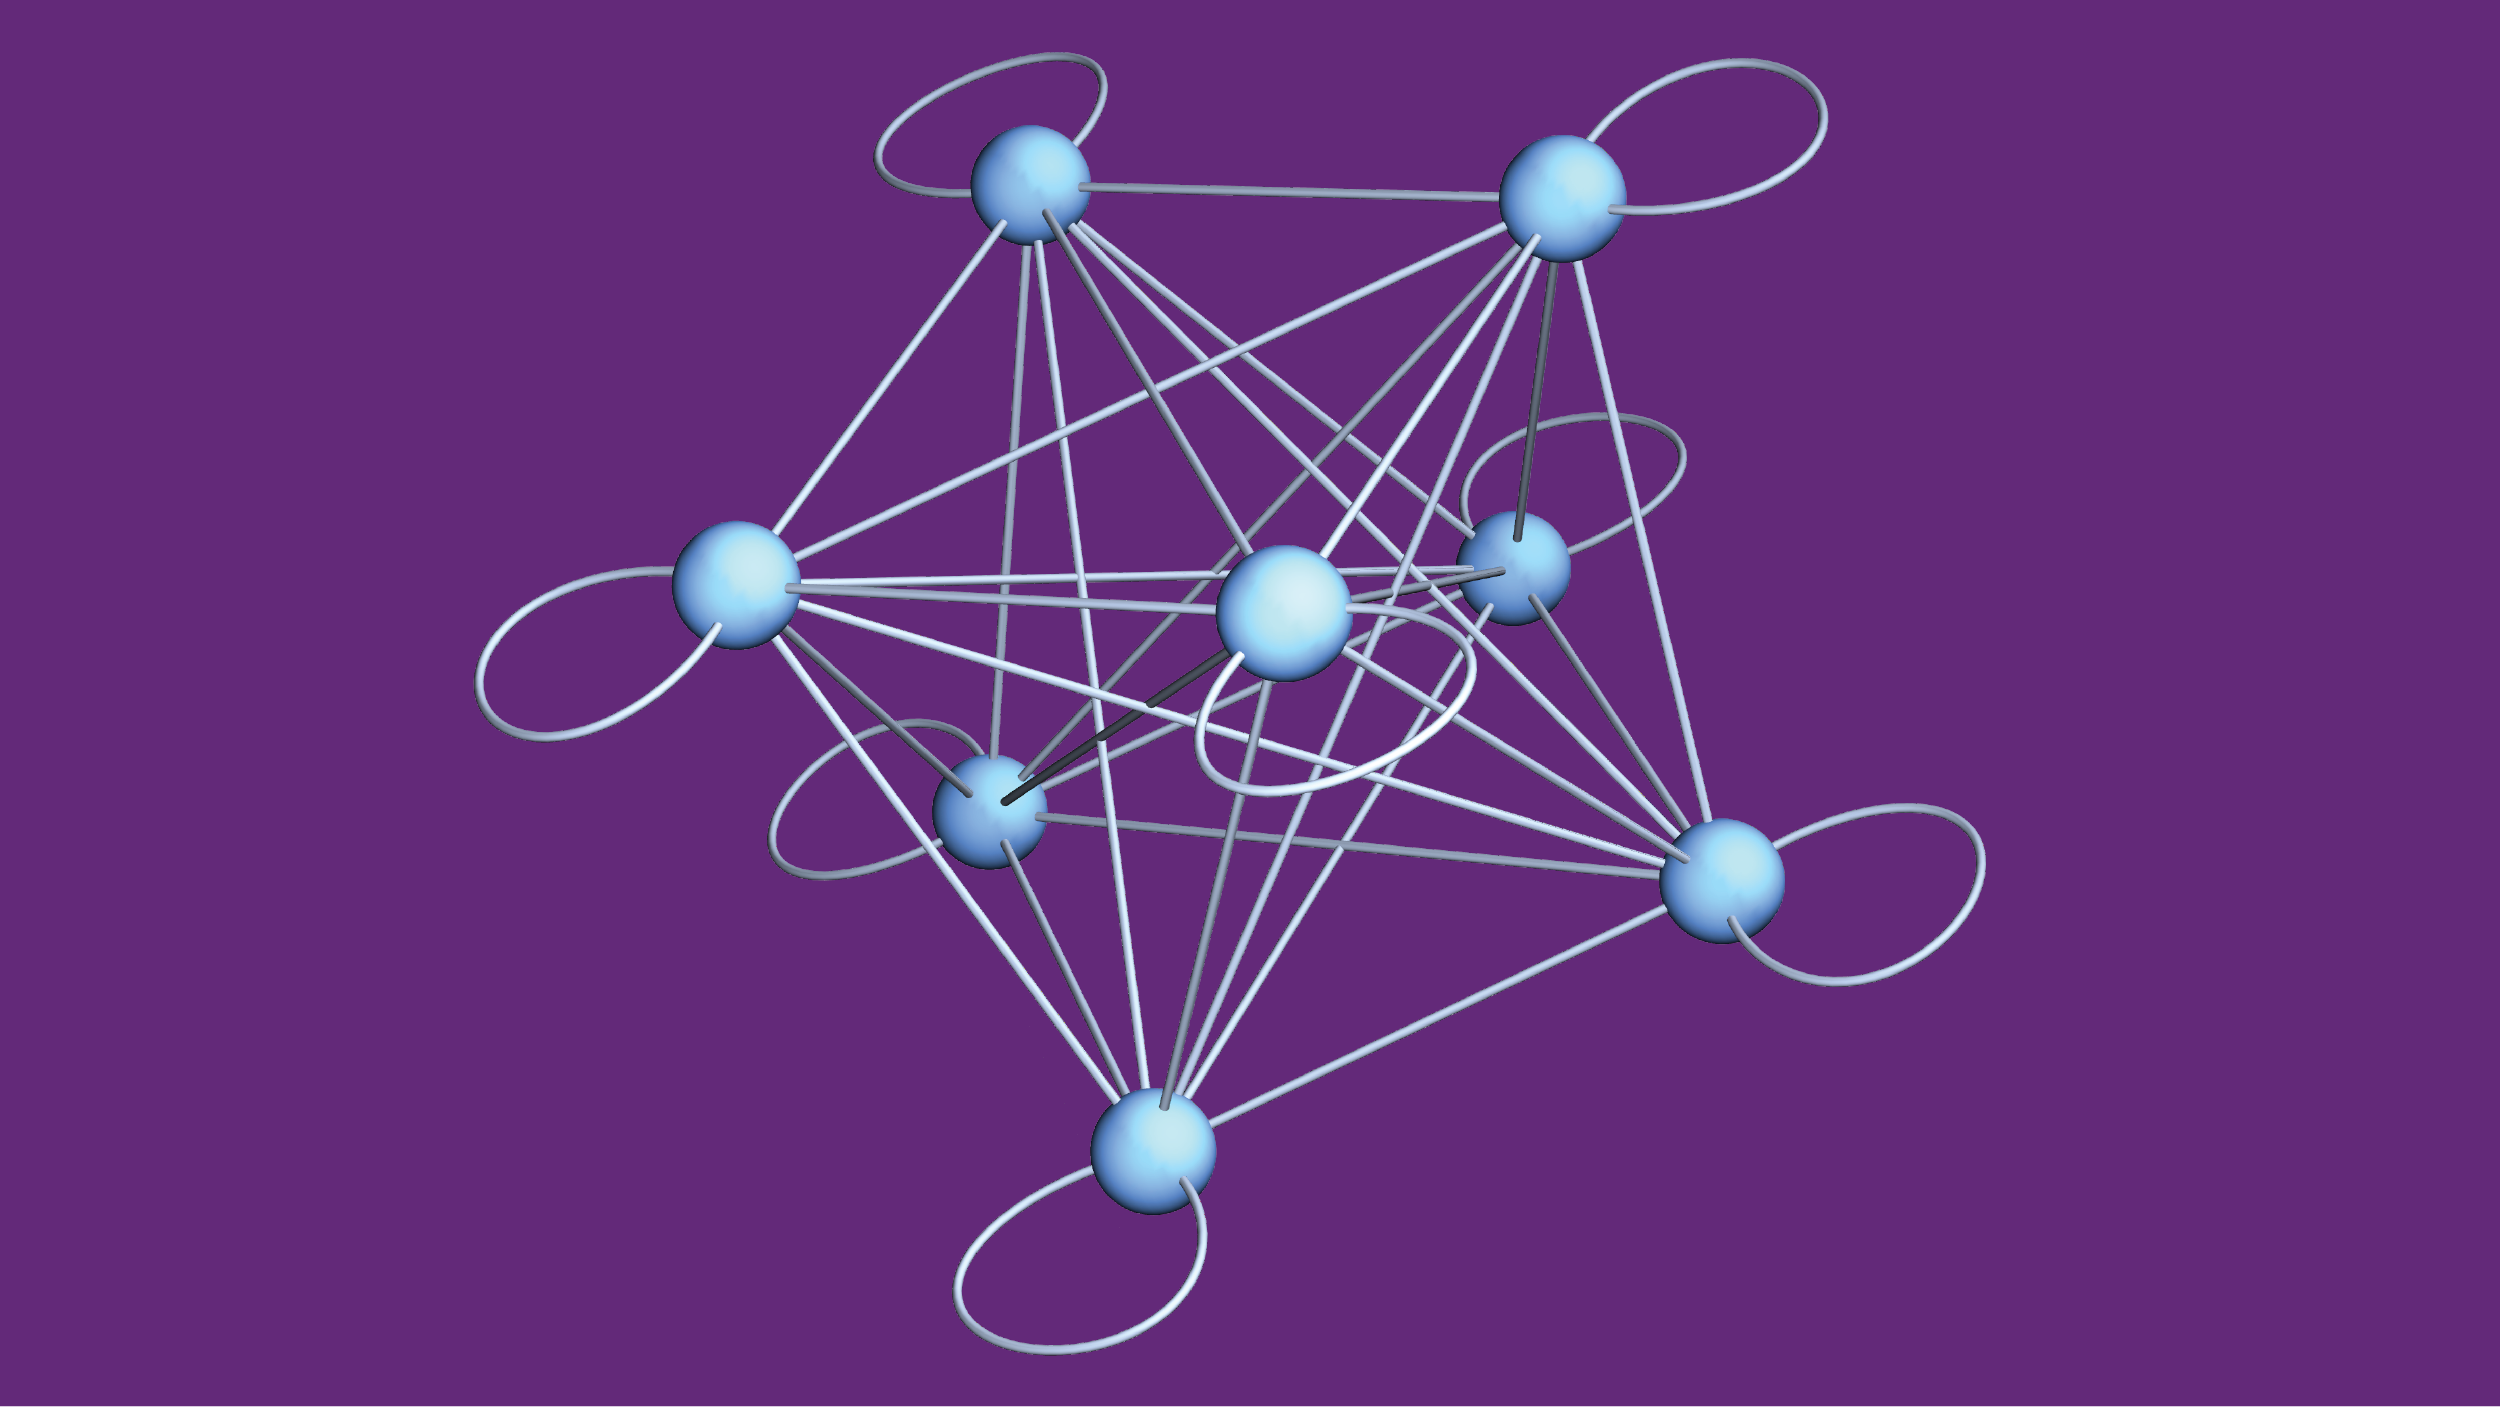 A collection of quantum particles can store information in various collective quantum states. The above model represents the states as blue nodes and illustrates how interactions can scramble the organized information of initial states into a messy combination by mixing the options along the illustrated links. (Credit: Amit Vikram, UMD)